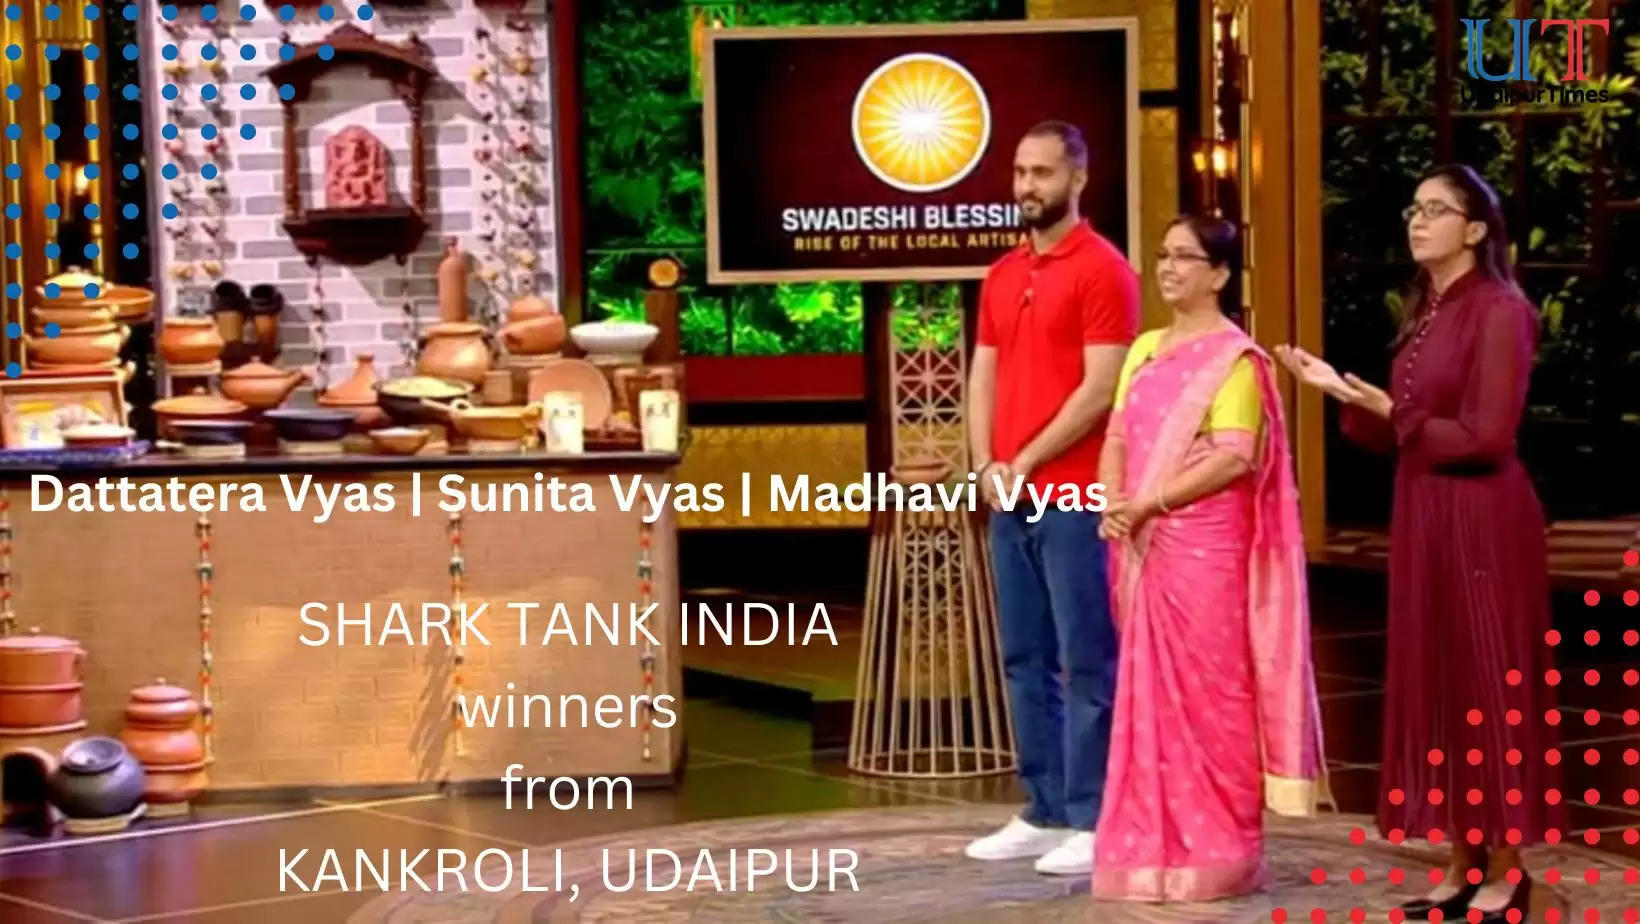 Swadeshi Blessings from Kankroli Udaipur exports Earthenware across 25 countries and has emerged from Shark Tank with an investment of Rs 2 Crore